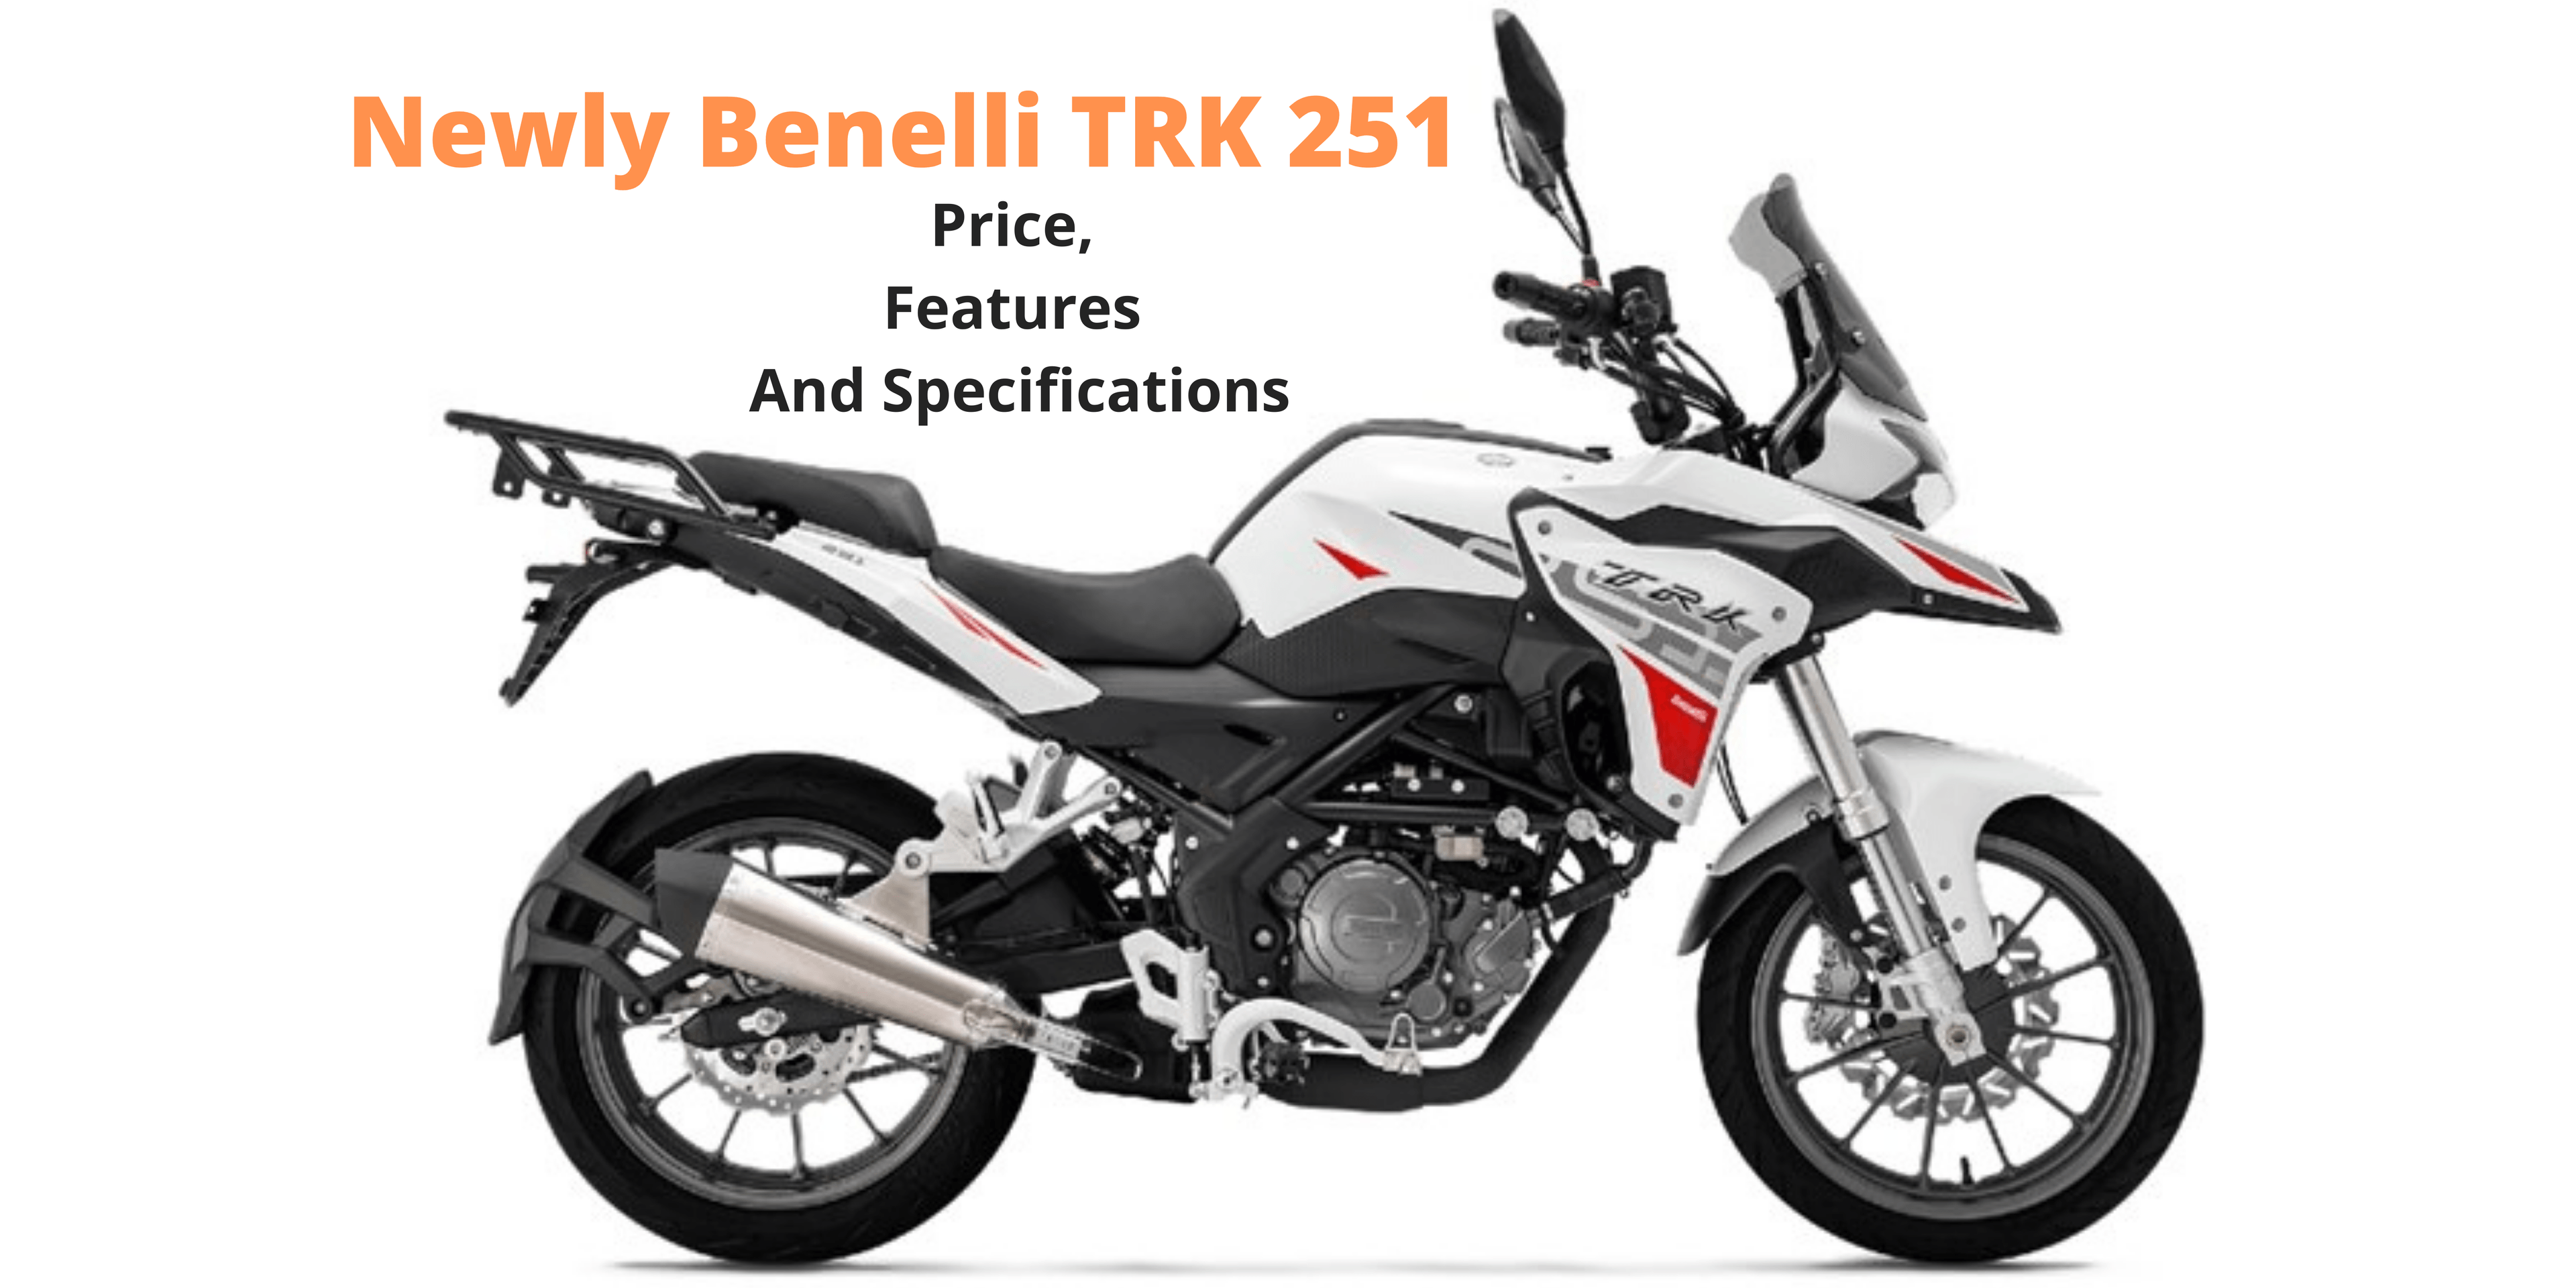 Benelli TRK 251 Price, Features and Specifications  news